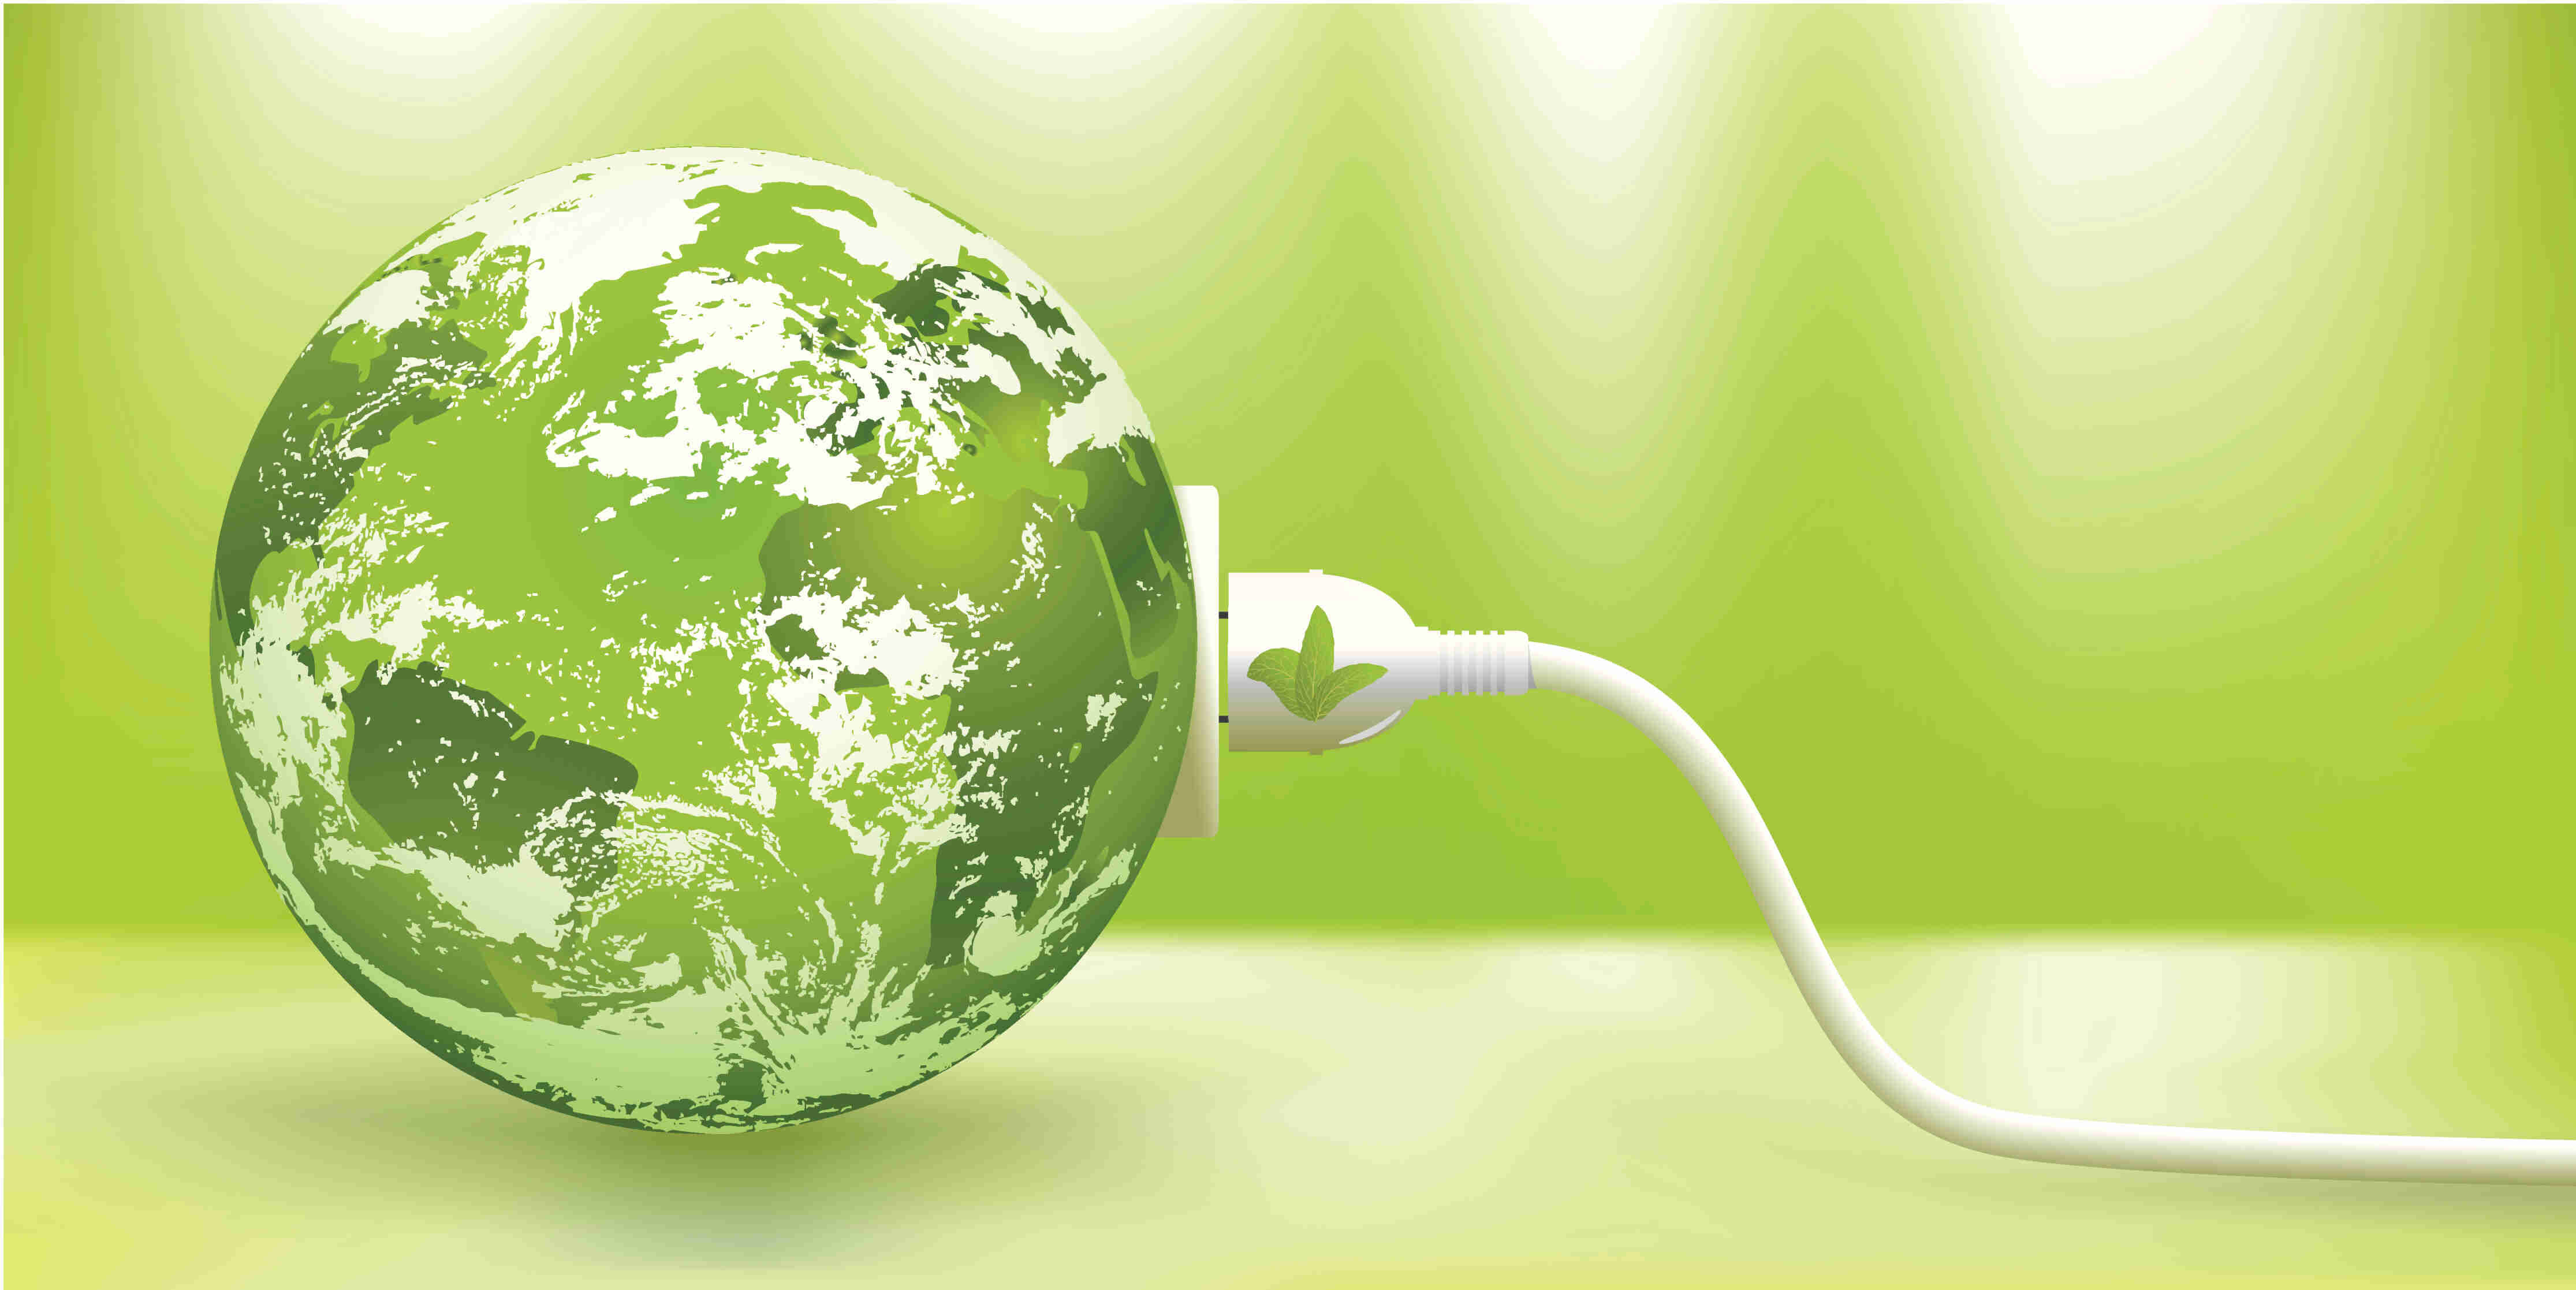 15-surprising-facts-about-energy-conservation